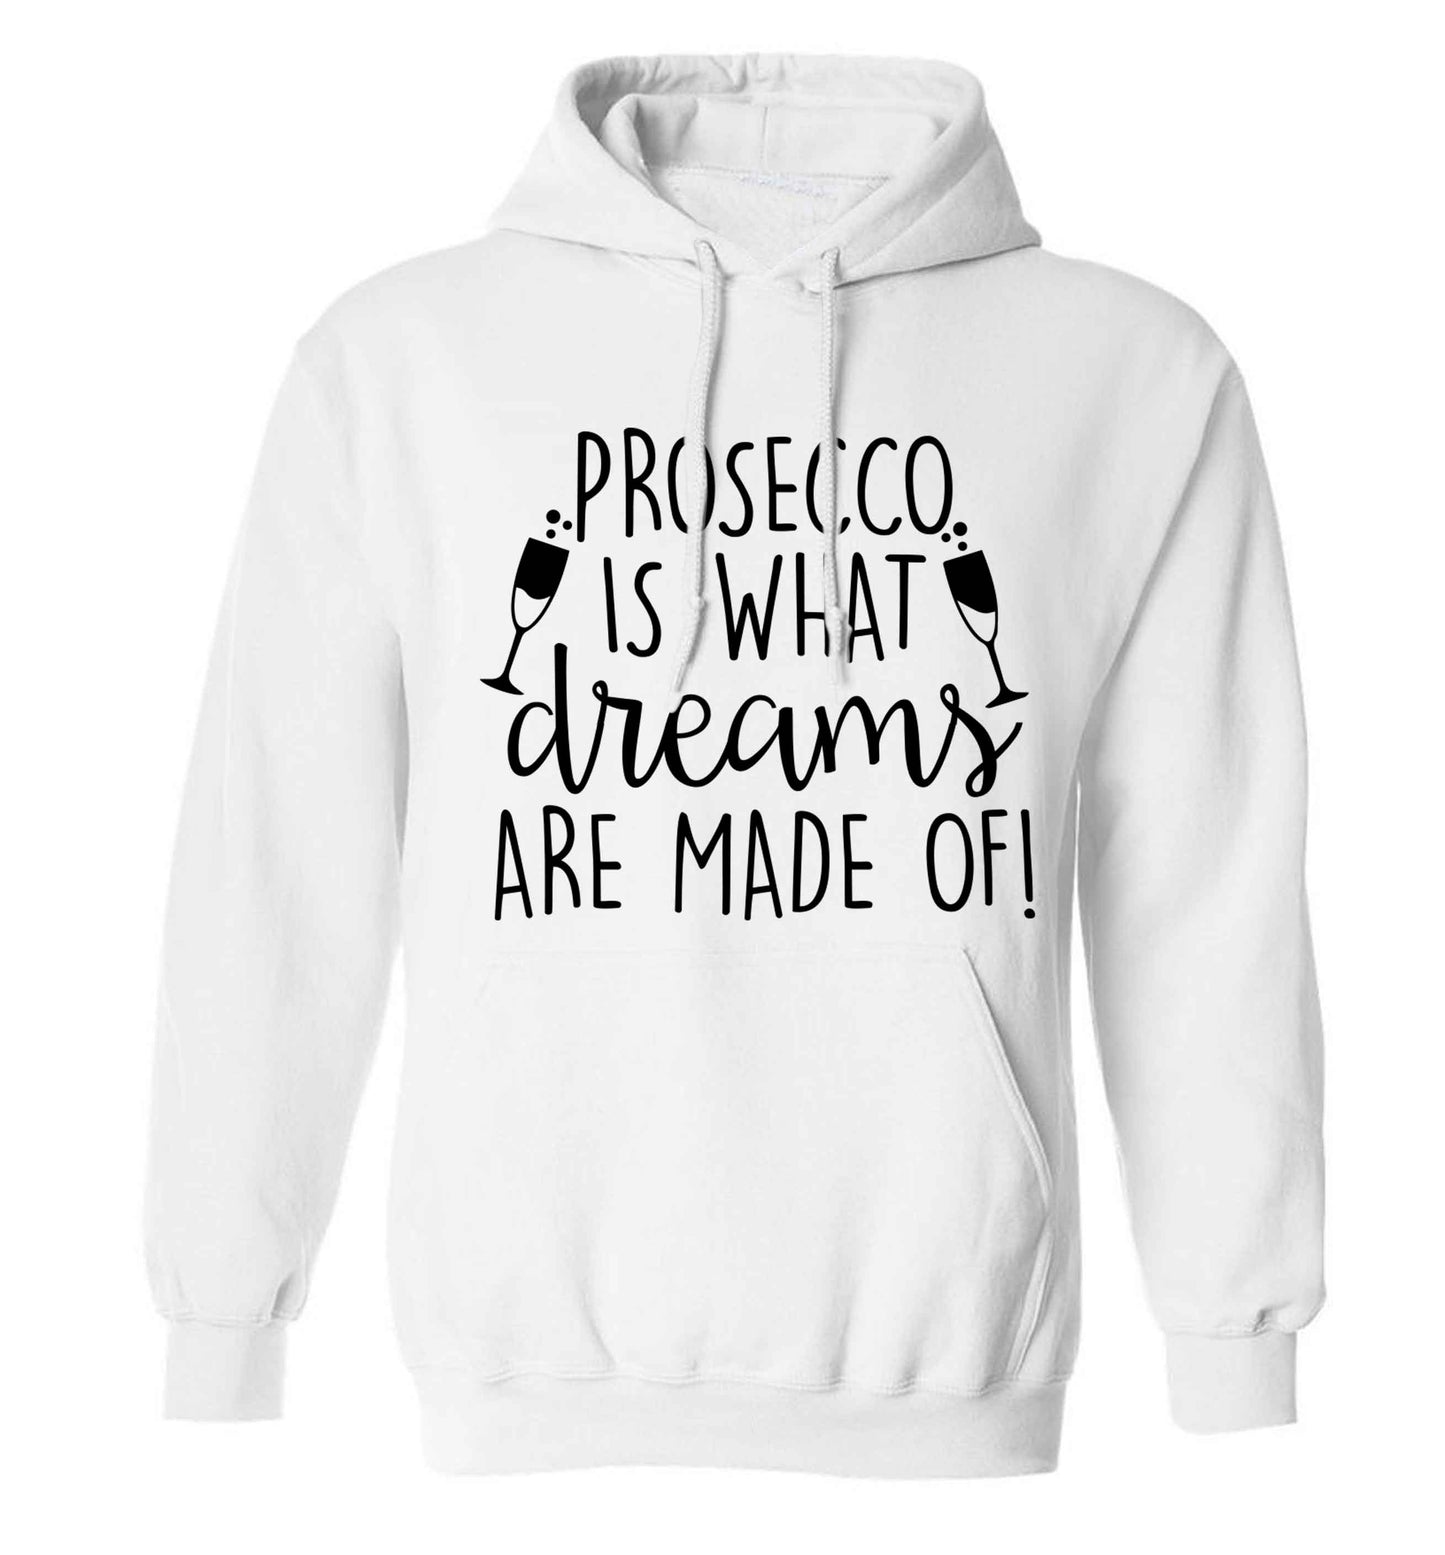 Prosecco is what dreams are made of adults unisex white hoodie 2XL